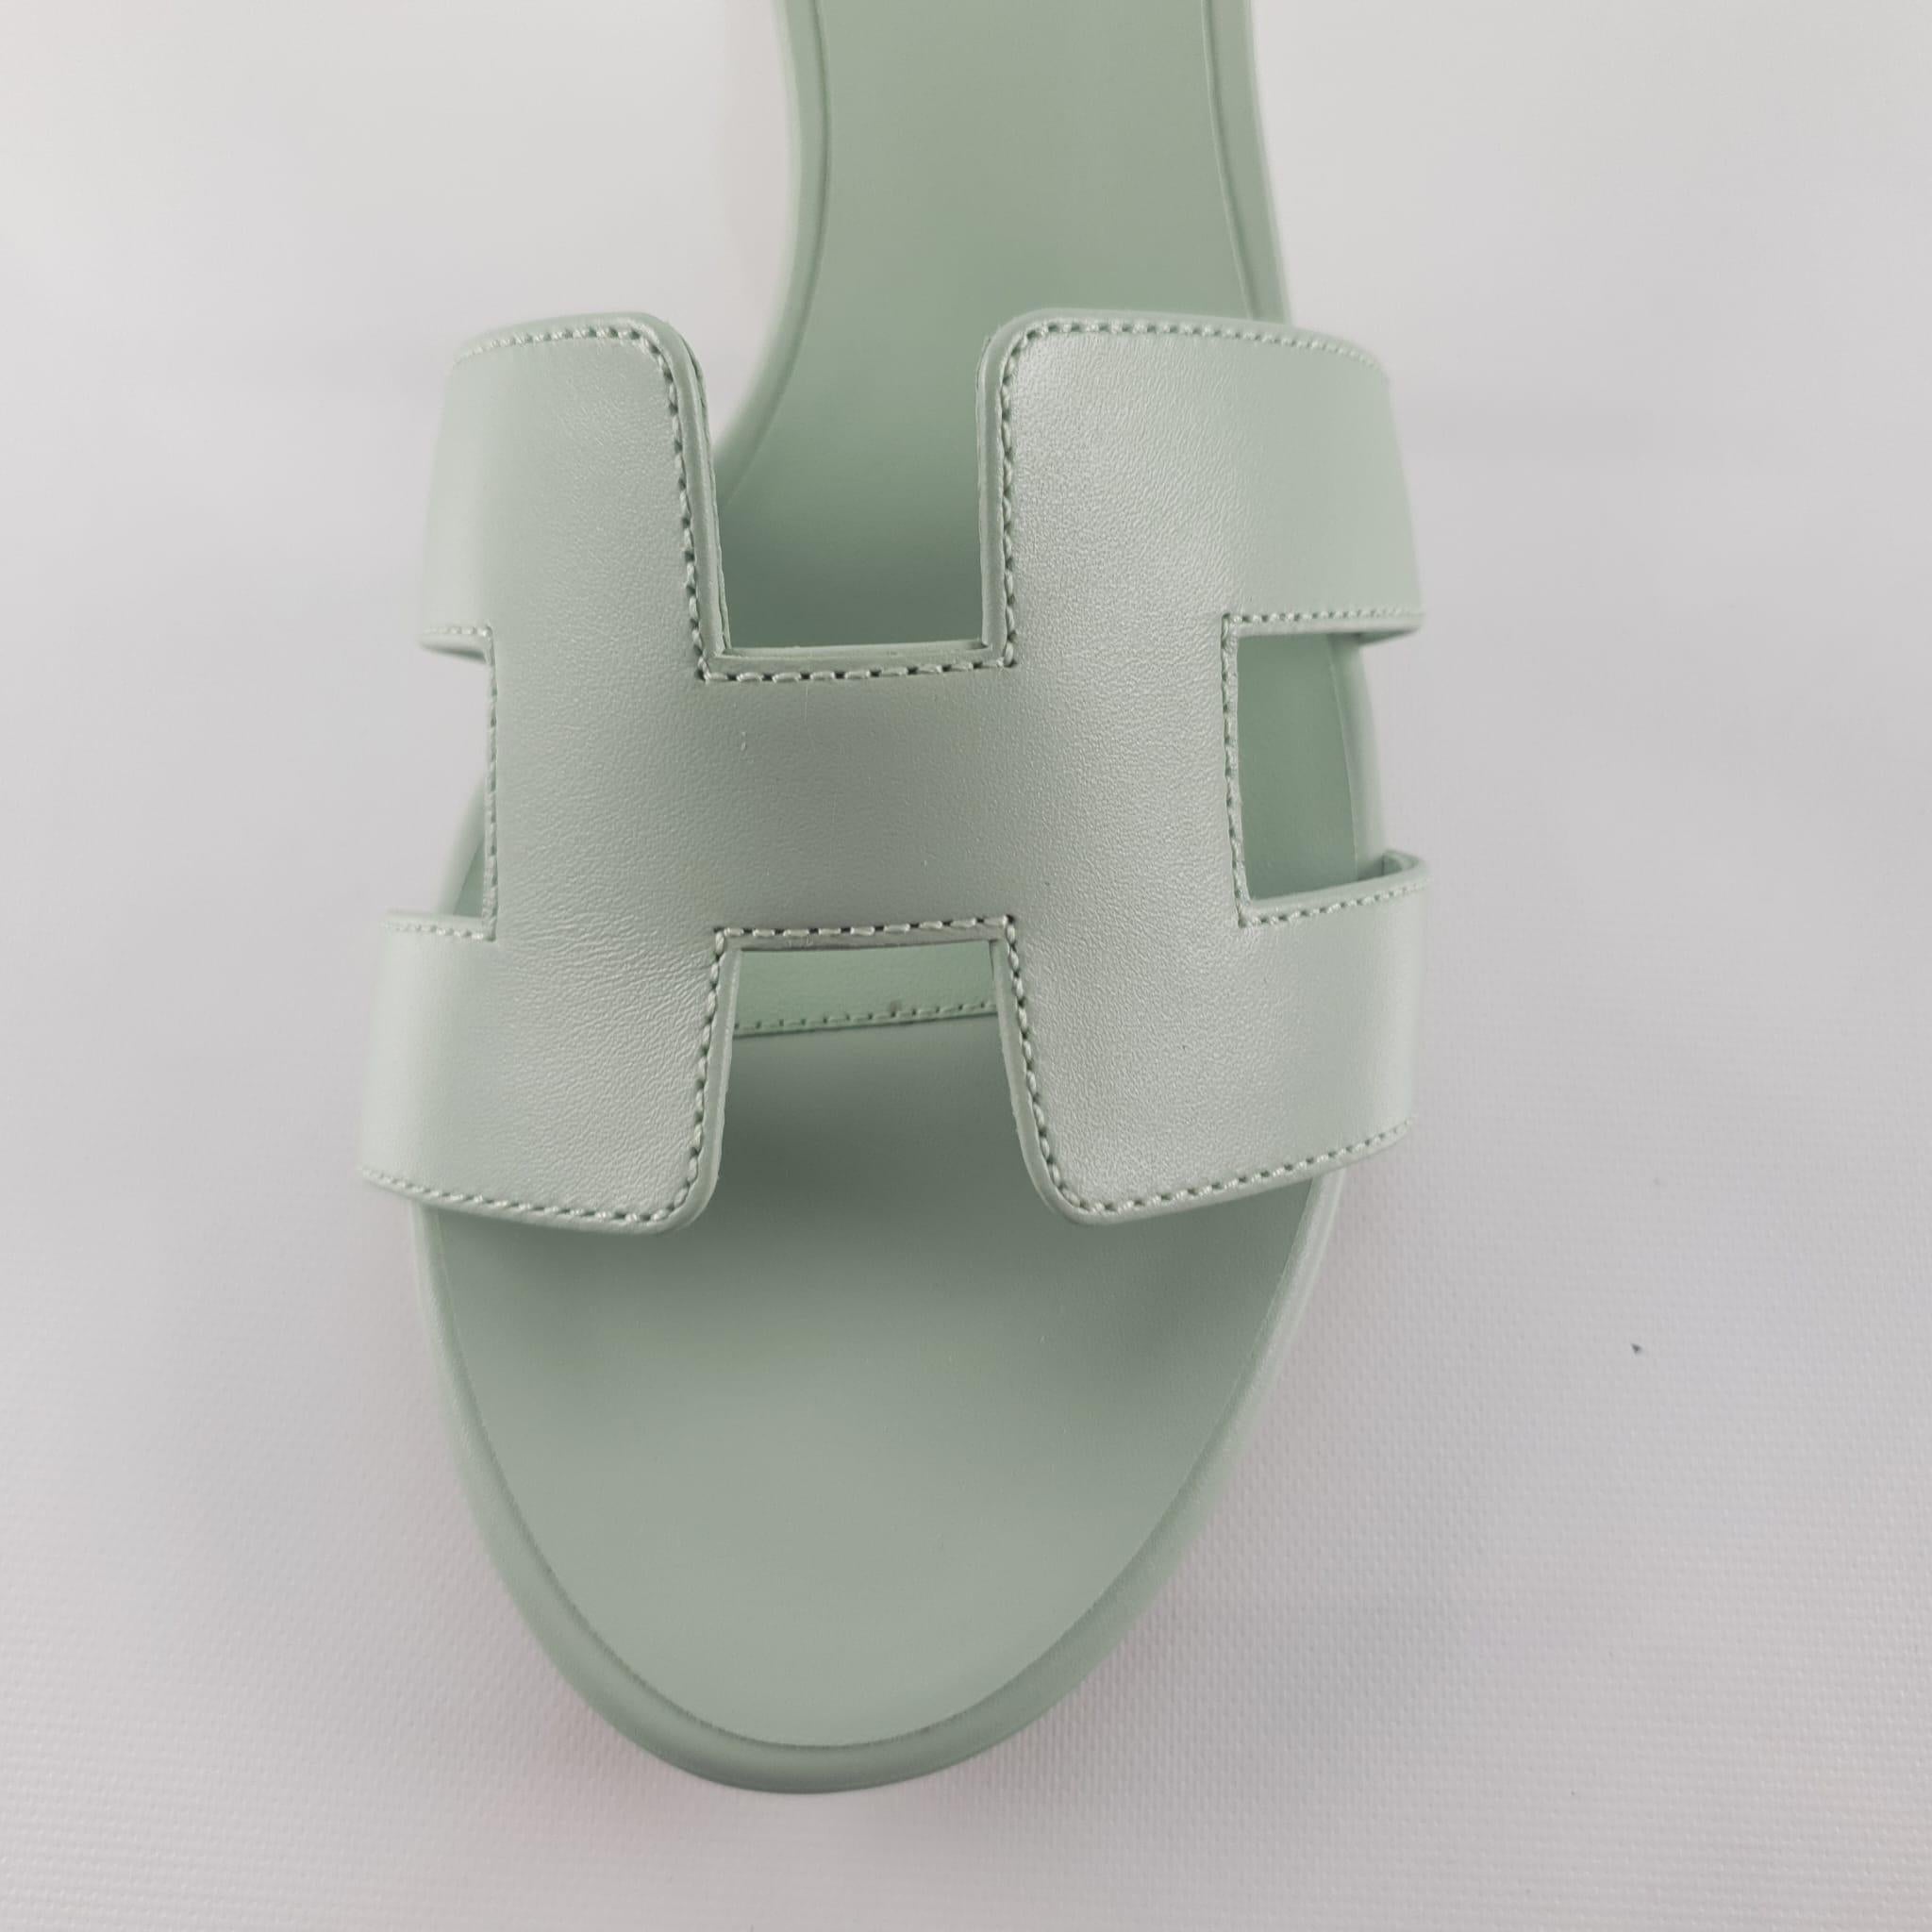 Preloved, never used with box
Calfskin. Heel height: 5 cm
Color: Vert D'eau
Size 39